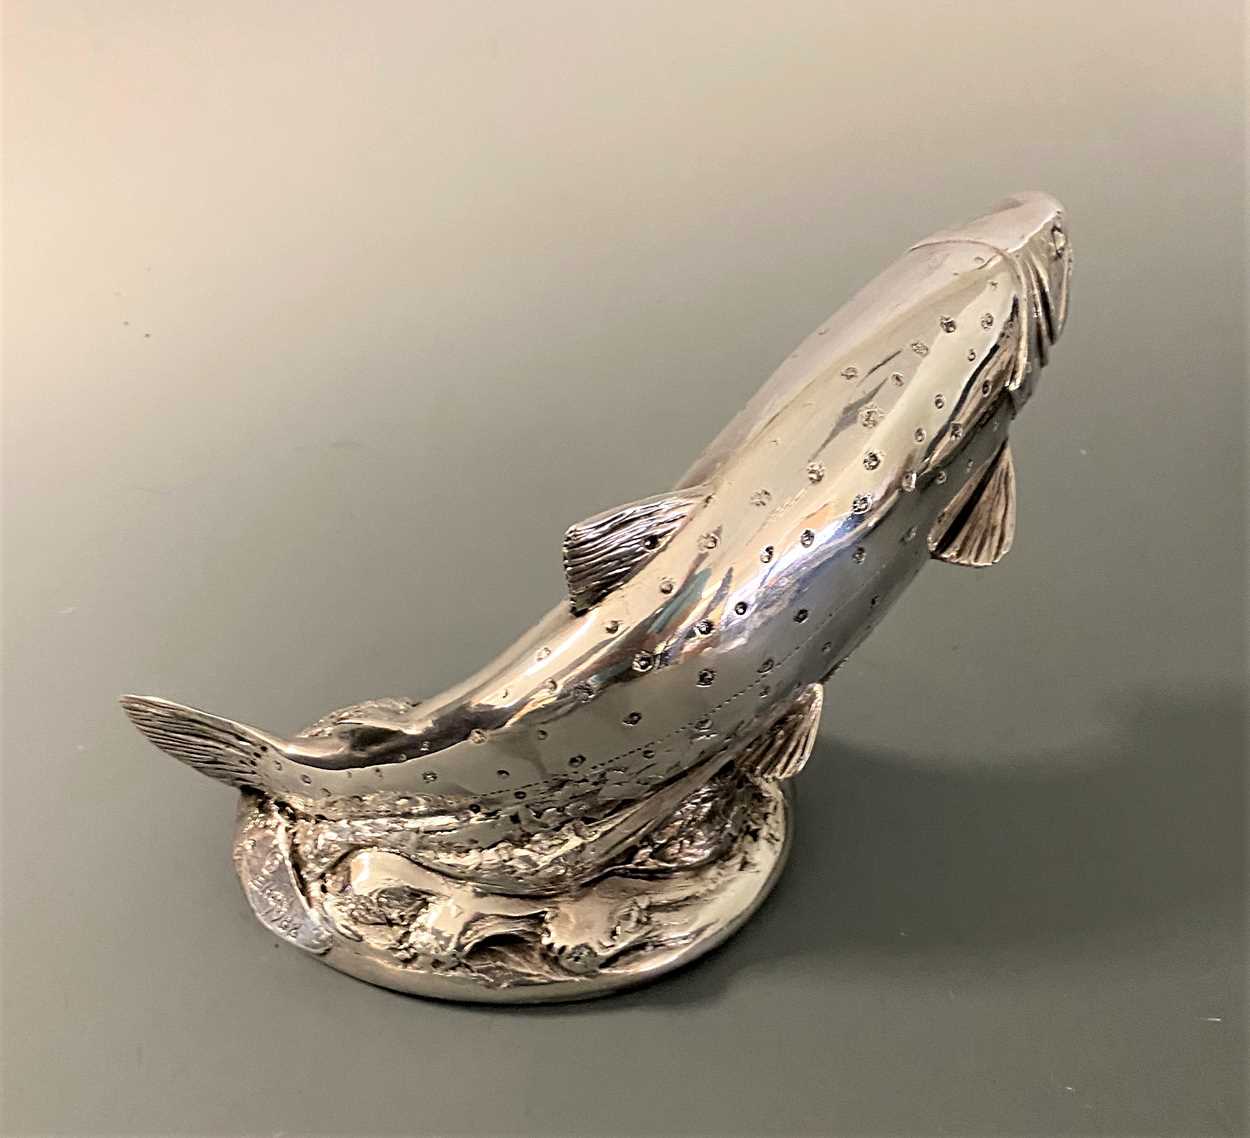 A modern and realistic silver model of a leaping salmon, - Image 3 of 6